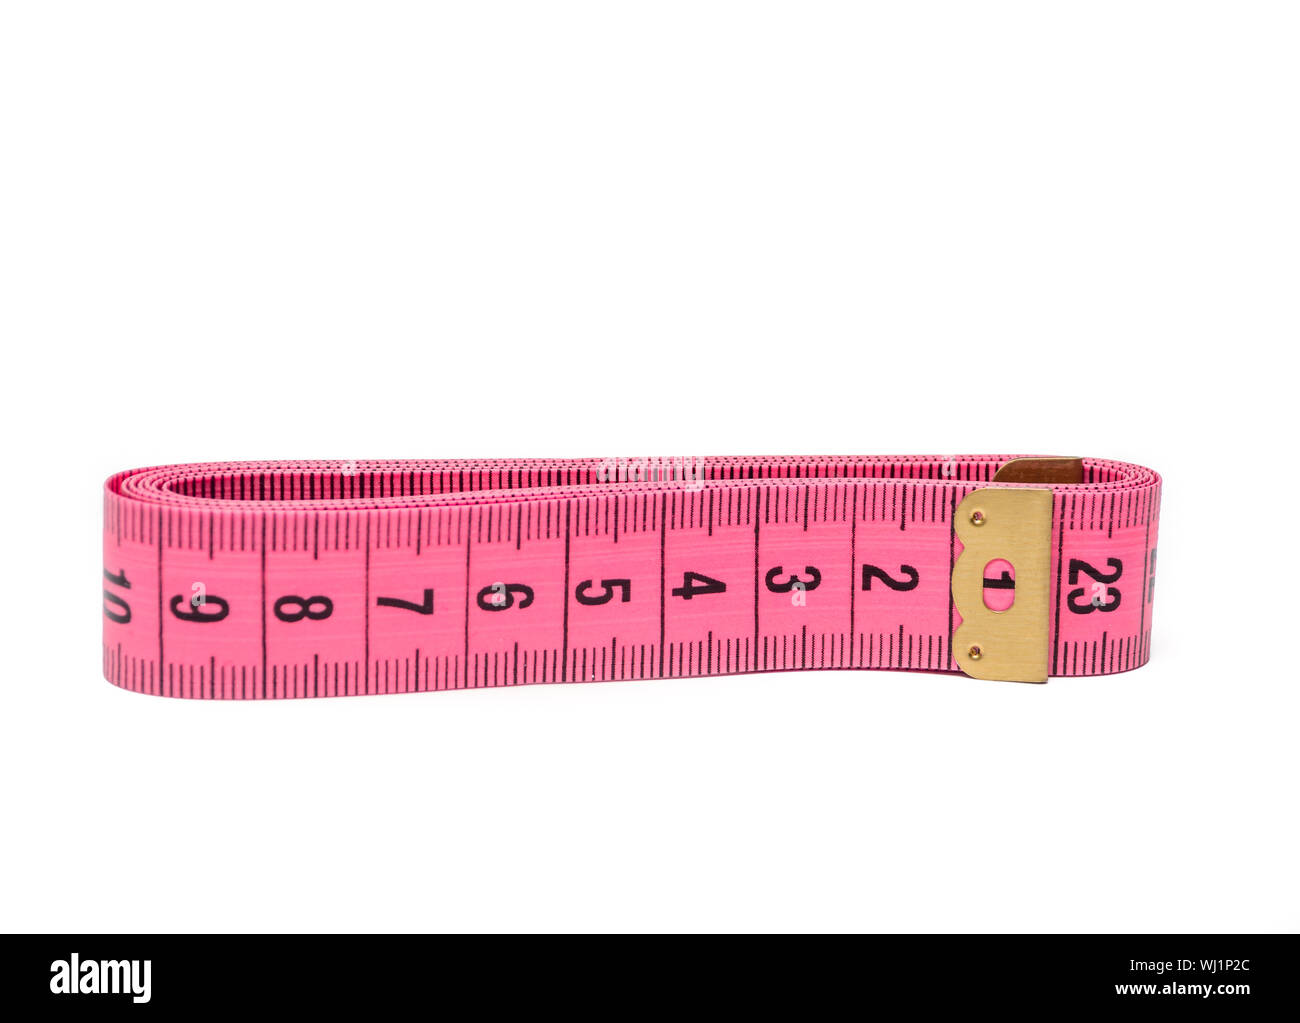 https://c8.alamy.com/comp/WJ1P2C/pink-measuring-tape-in-centimeters-isolated-on-white-background-WJ1P2C.jpg